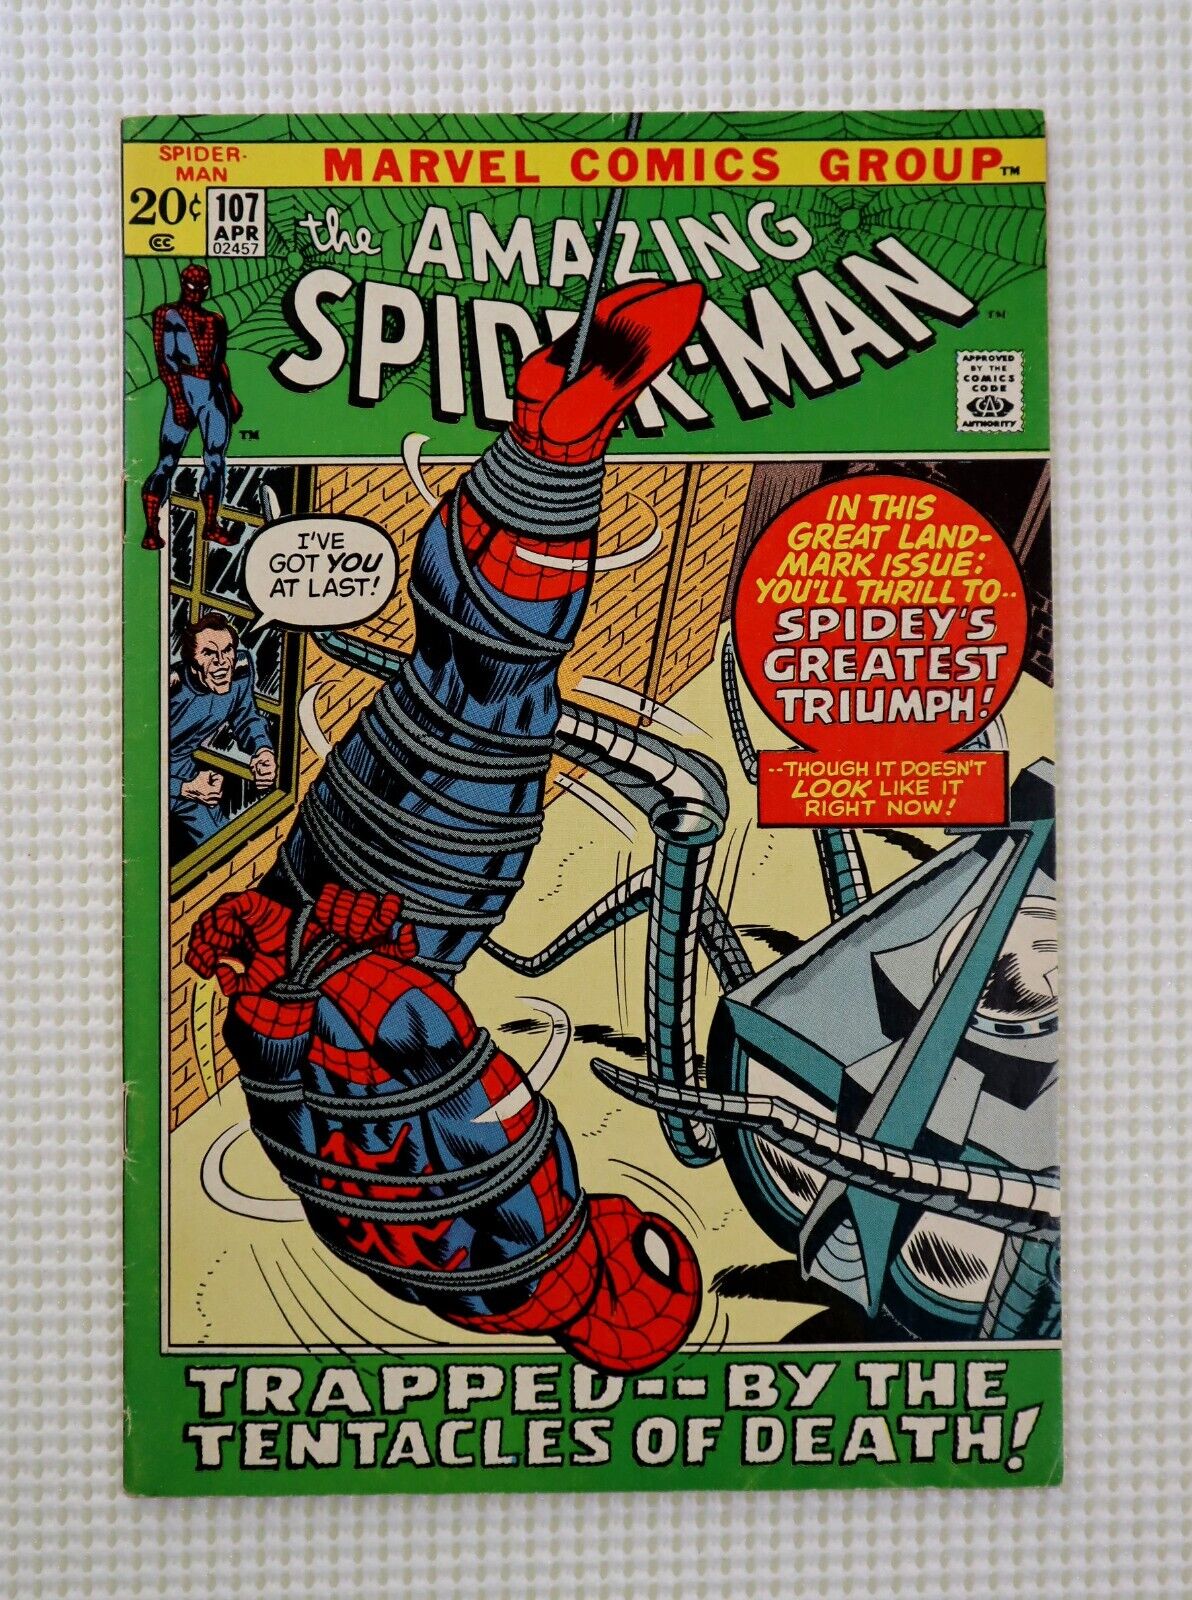 1972 The Amazing Spider-Man 107, Marvel Comics 4/72: Spider-Slayer,20-cent cover